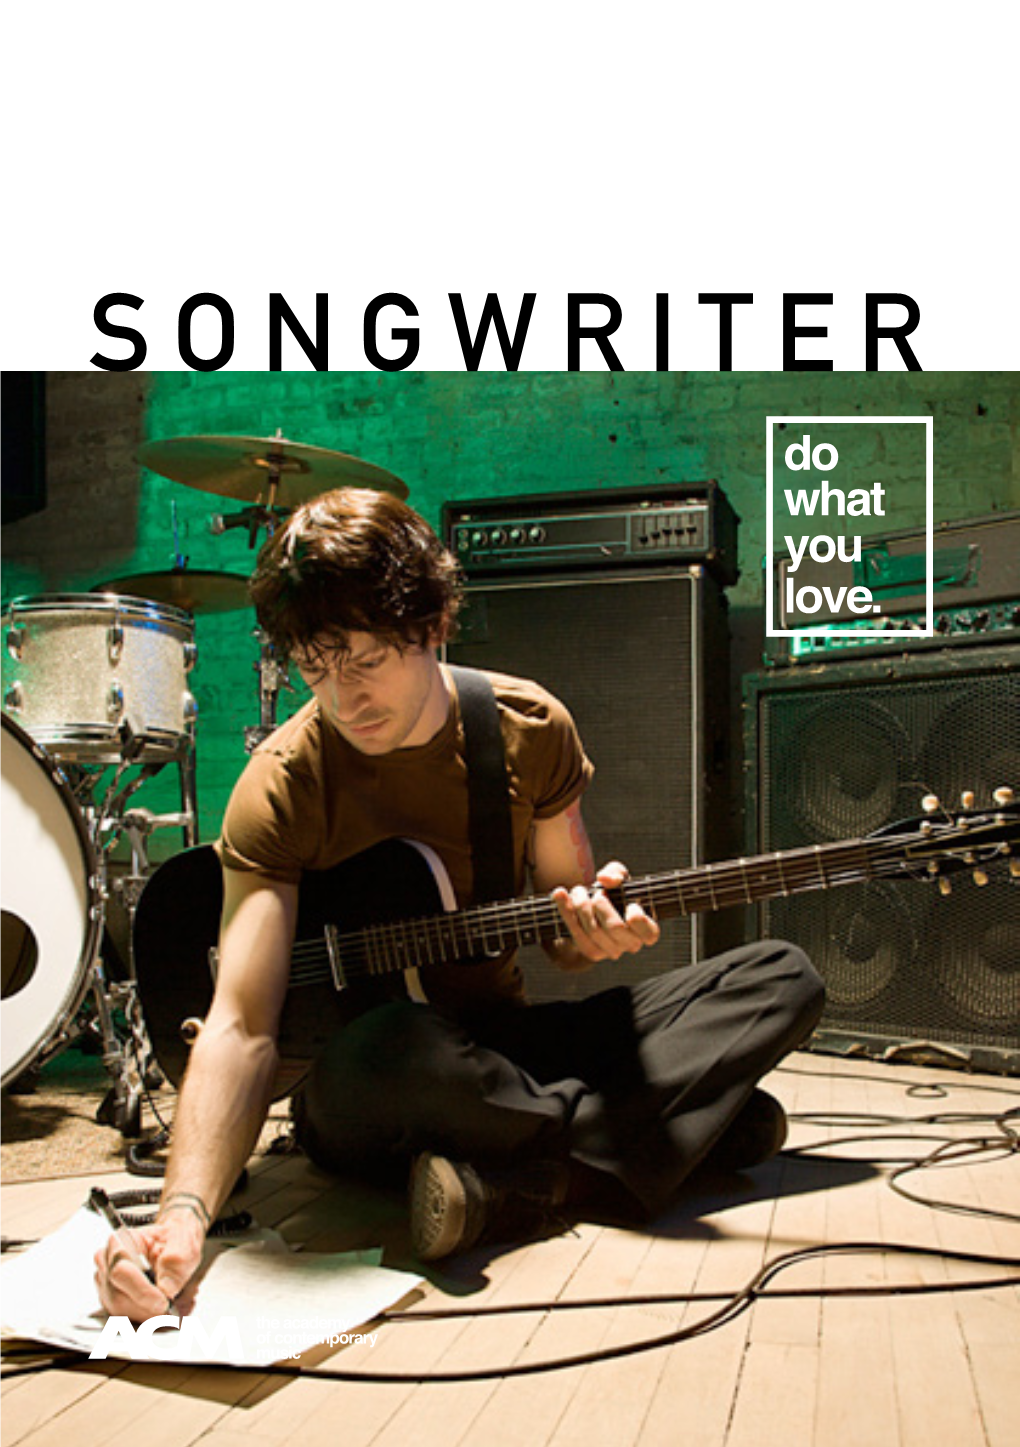 SONGWRITER Introduction